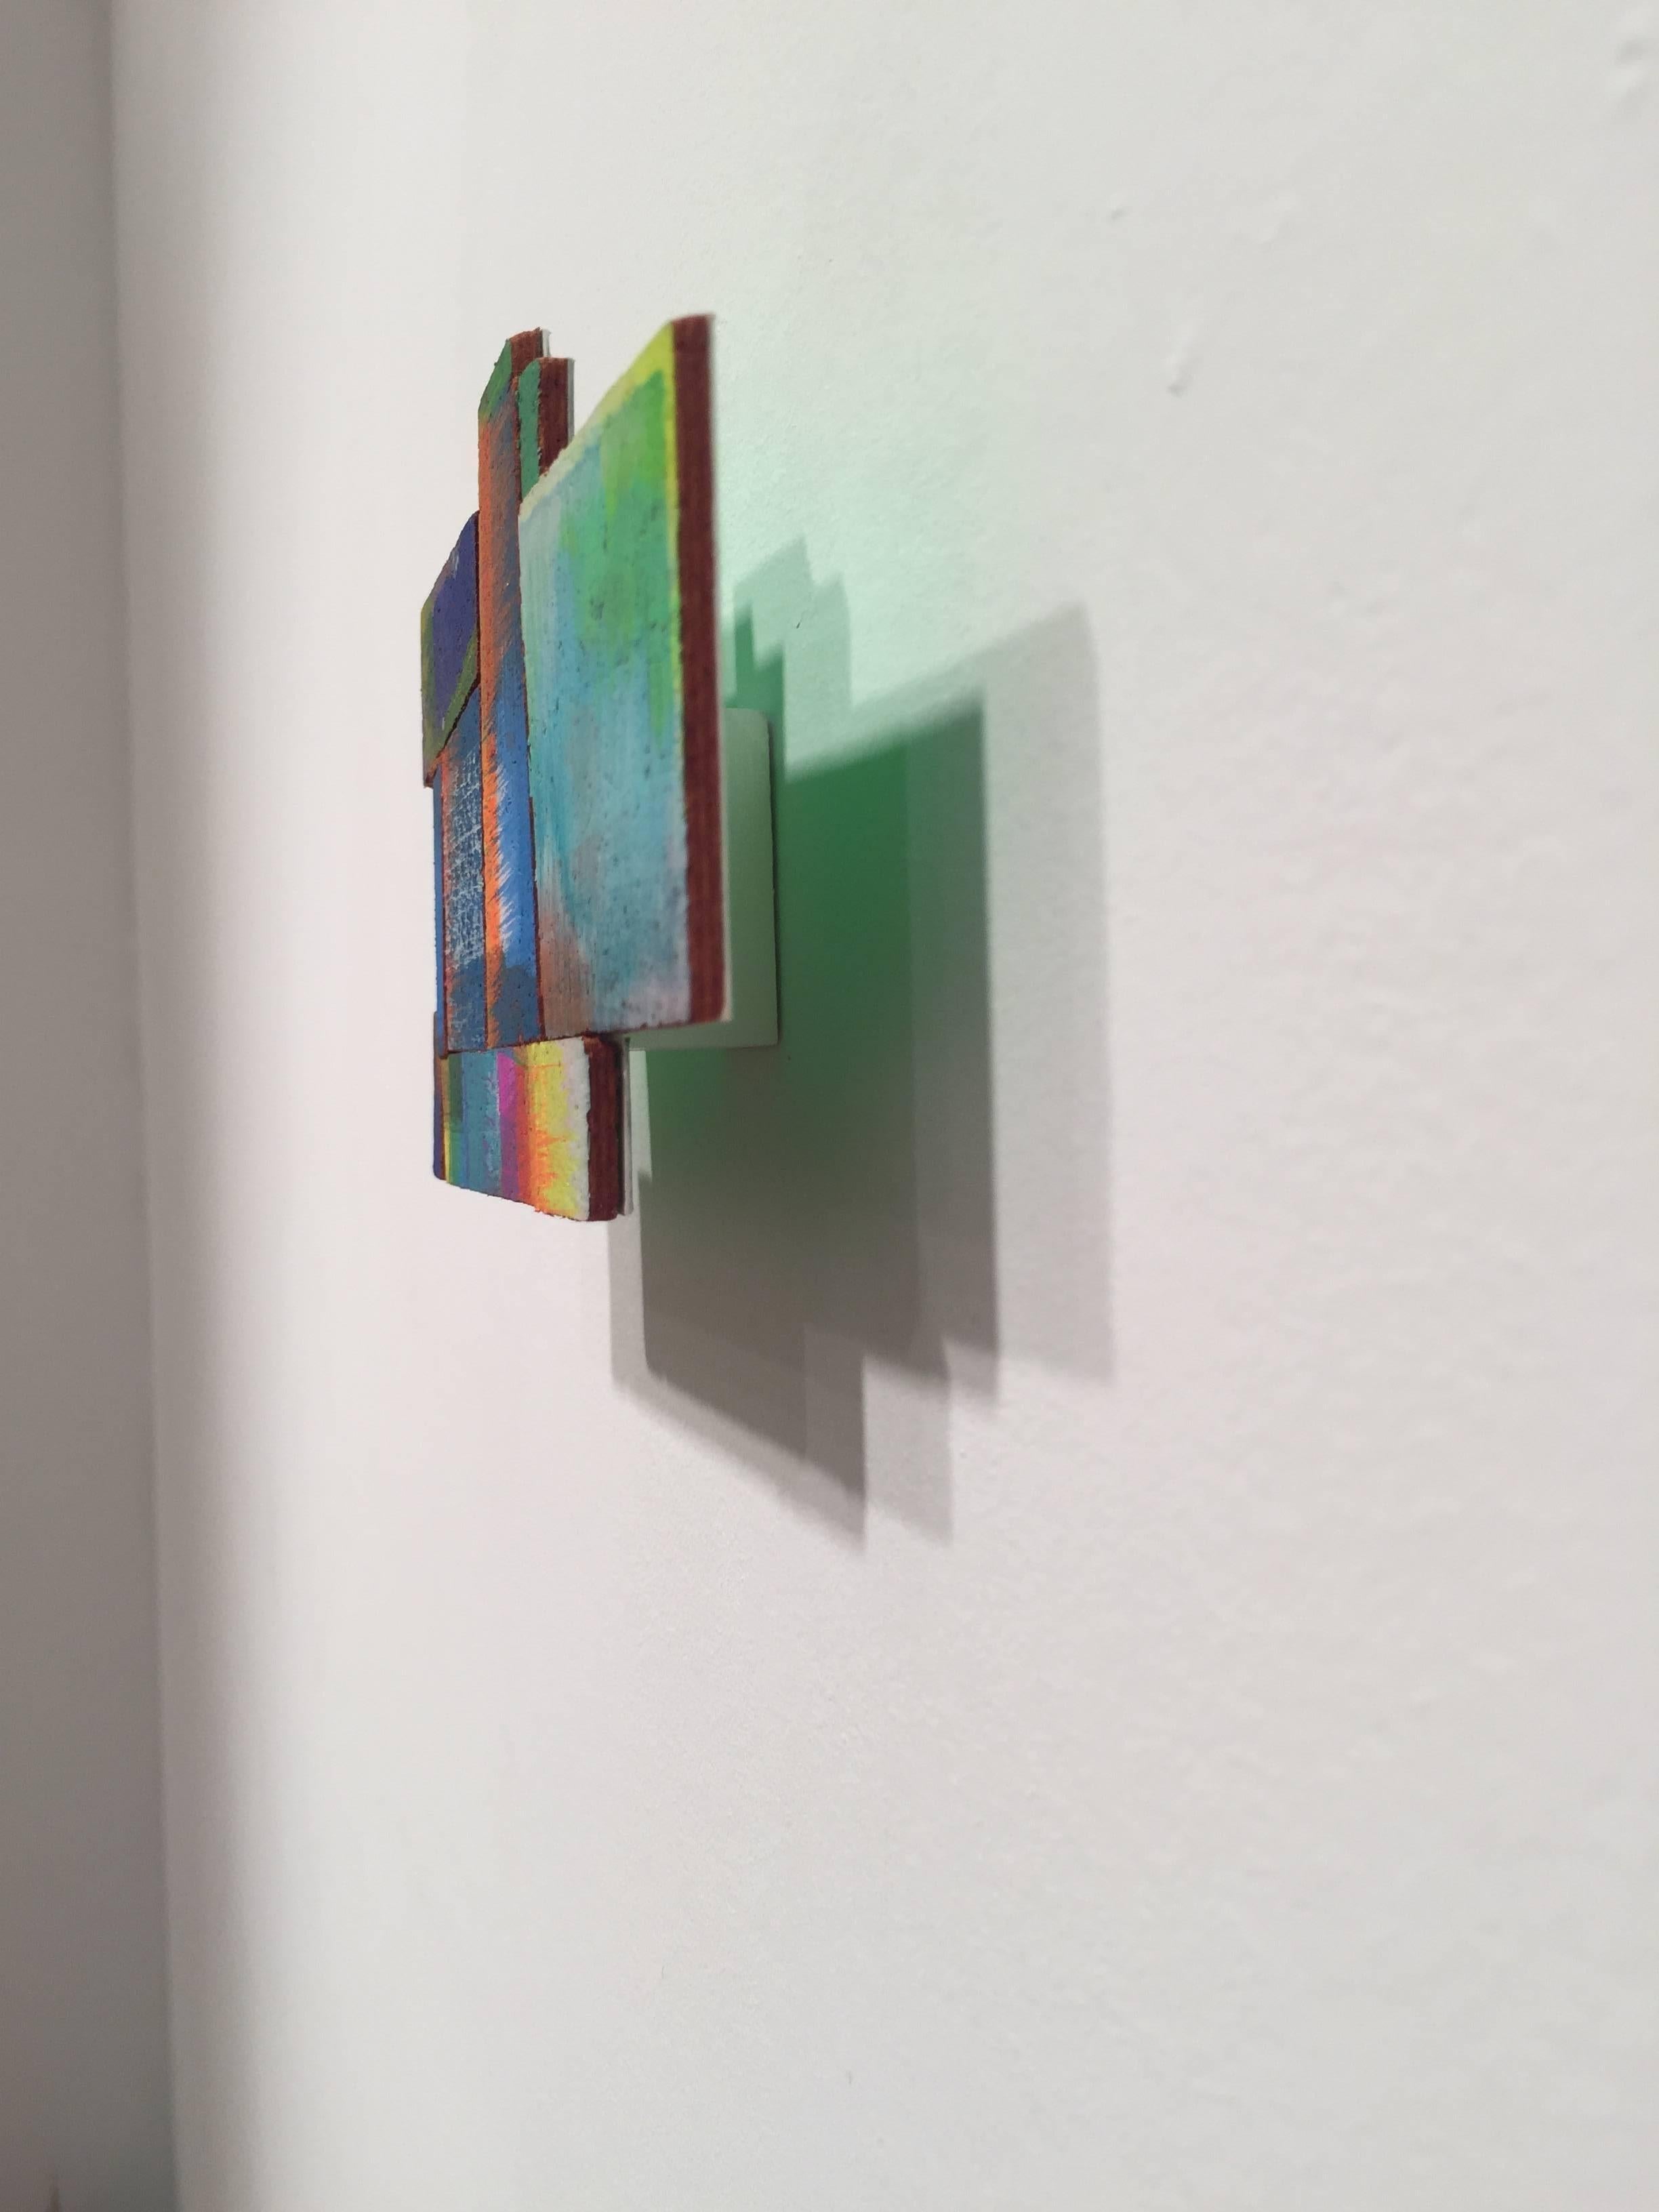 Detritus #2, multicolored acrylic on pressed wood abstract wall sculpture, 2015 - Sculpture by Joan Grubin